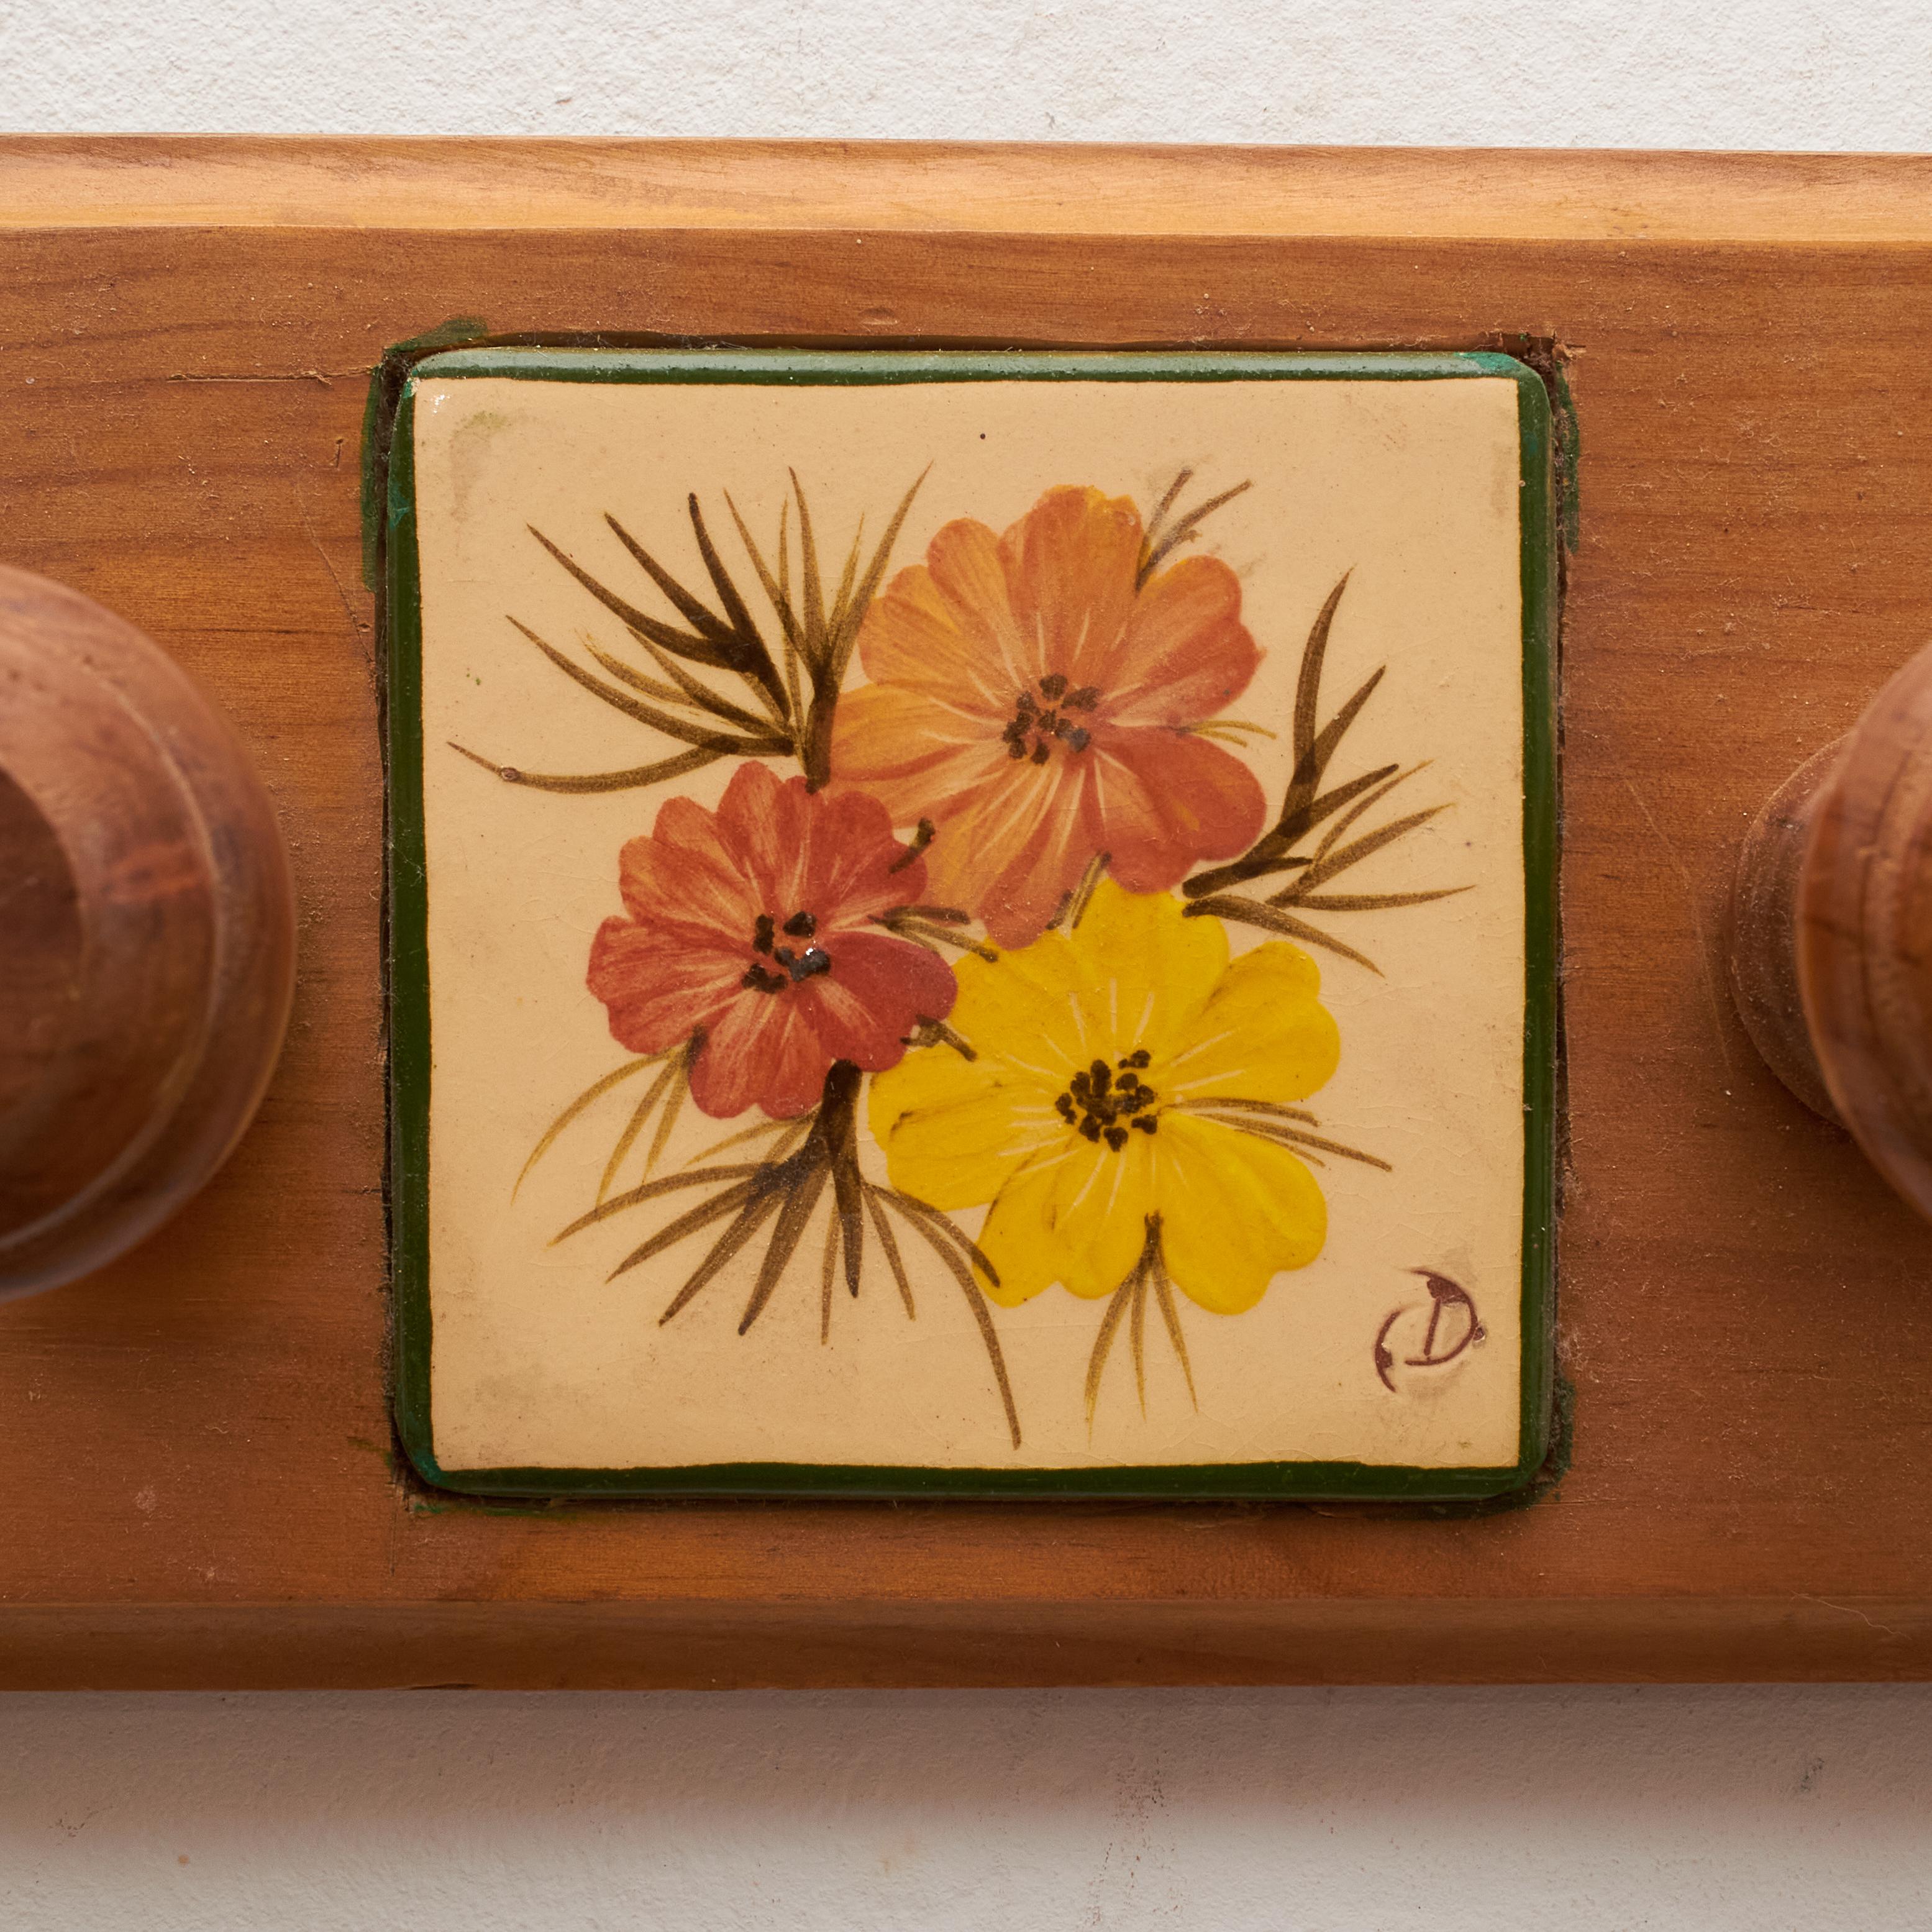 Mid-20th Century Vintage 1960 Catalan Artist Diaz Costa Hand-Painted Ceramic and Wood Hanger For Sale